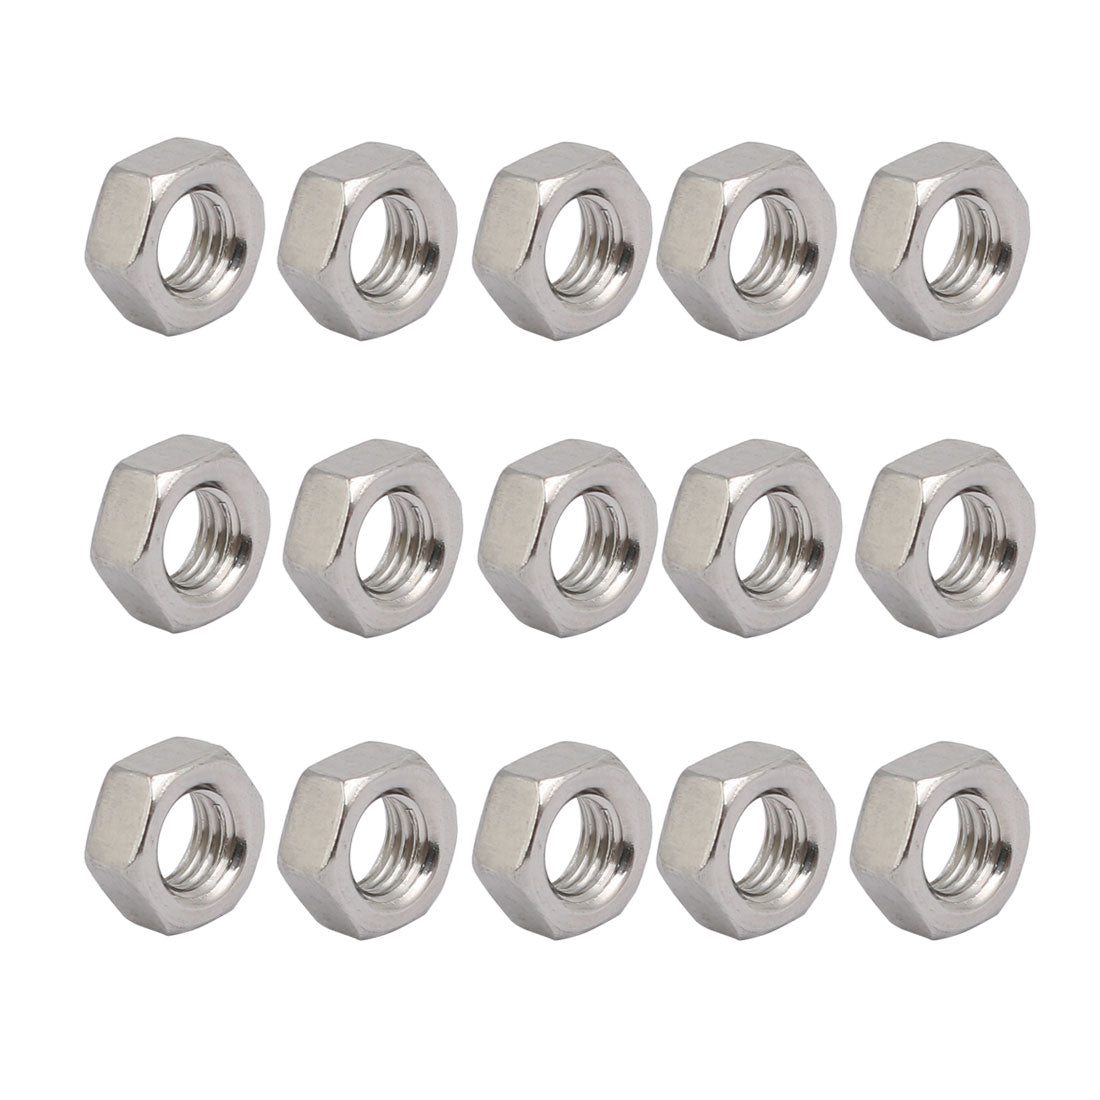 uxcell Uxcell 15pcs M5 x 0.8mm Pitch Metric Thread 201 Stainless Steel Left Hand Hex Nuts